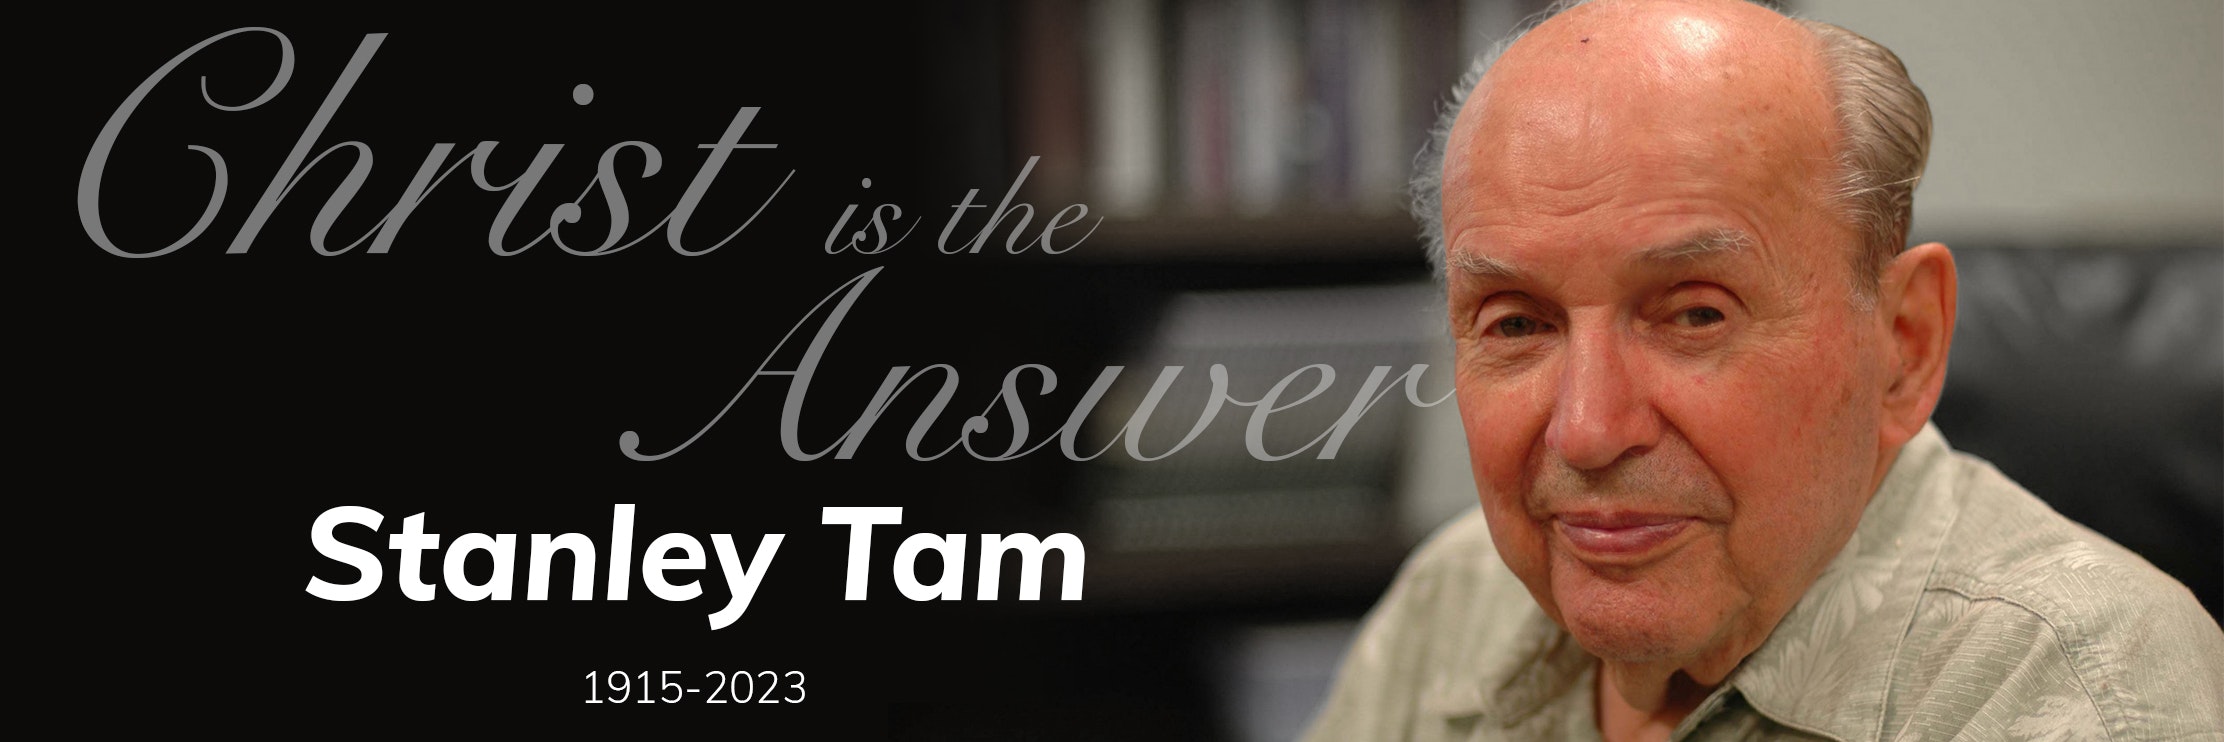 Head shot of Stanley Tam (1915-2023) with text, "Christ is the Answer"